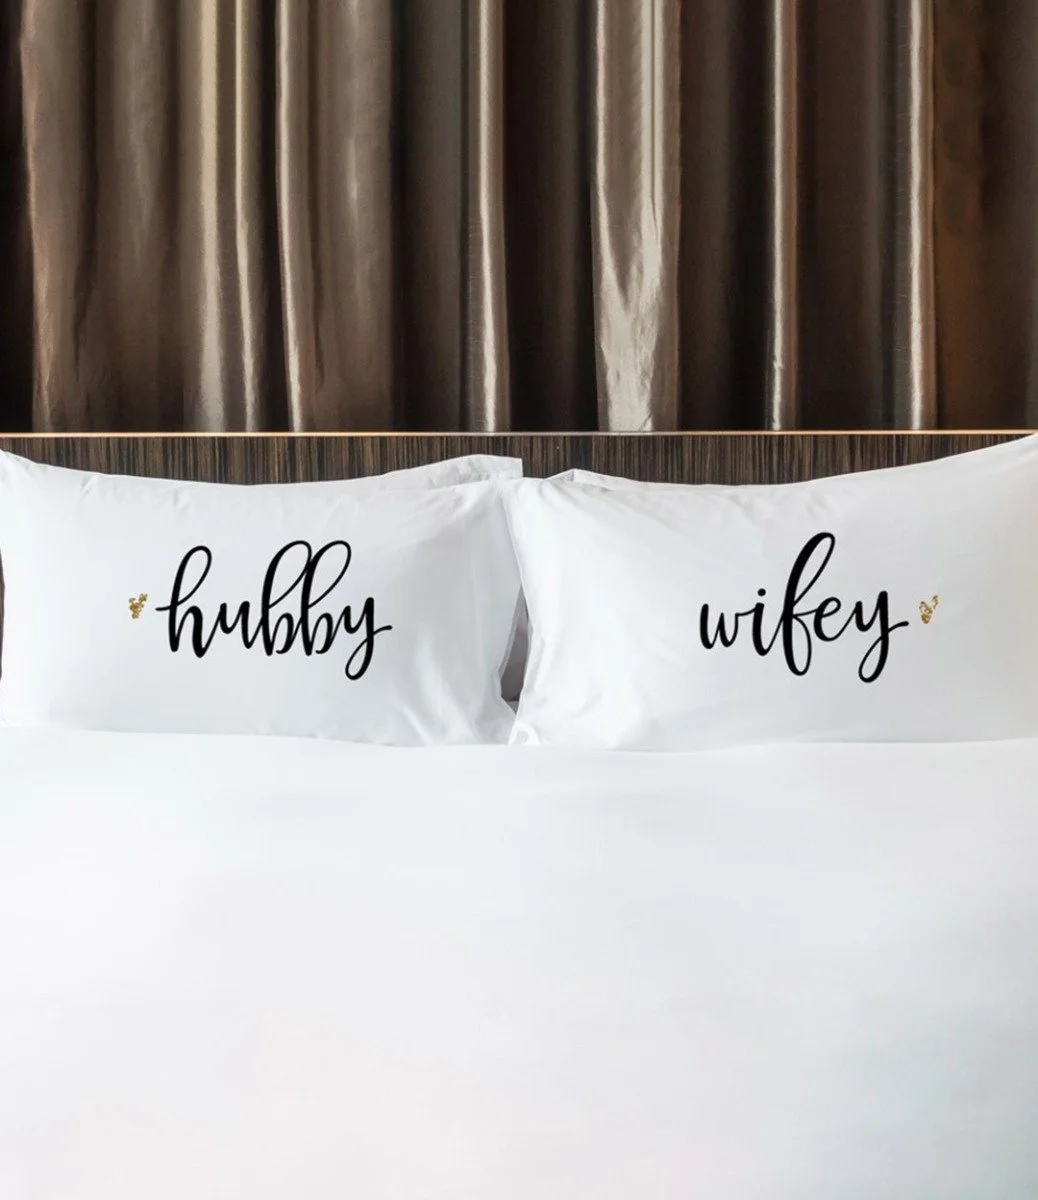 Hubby and Wifey Pillowcases